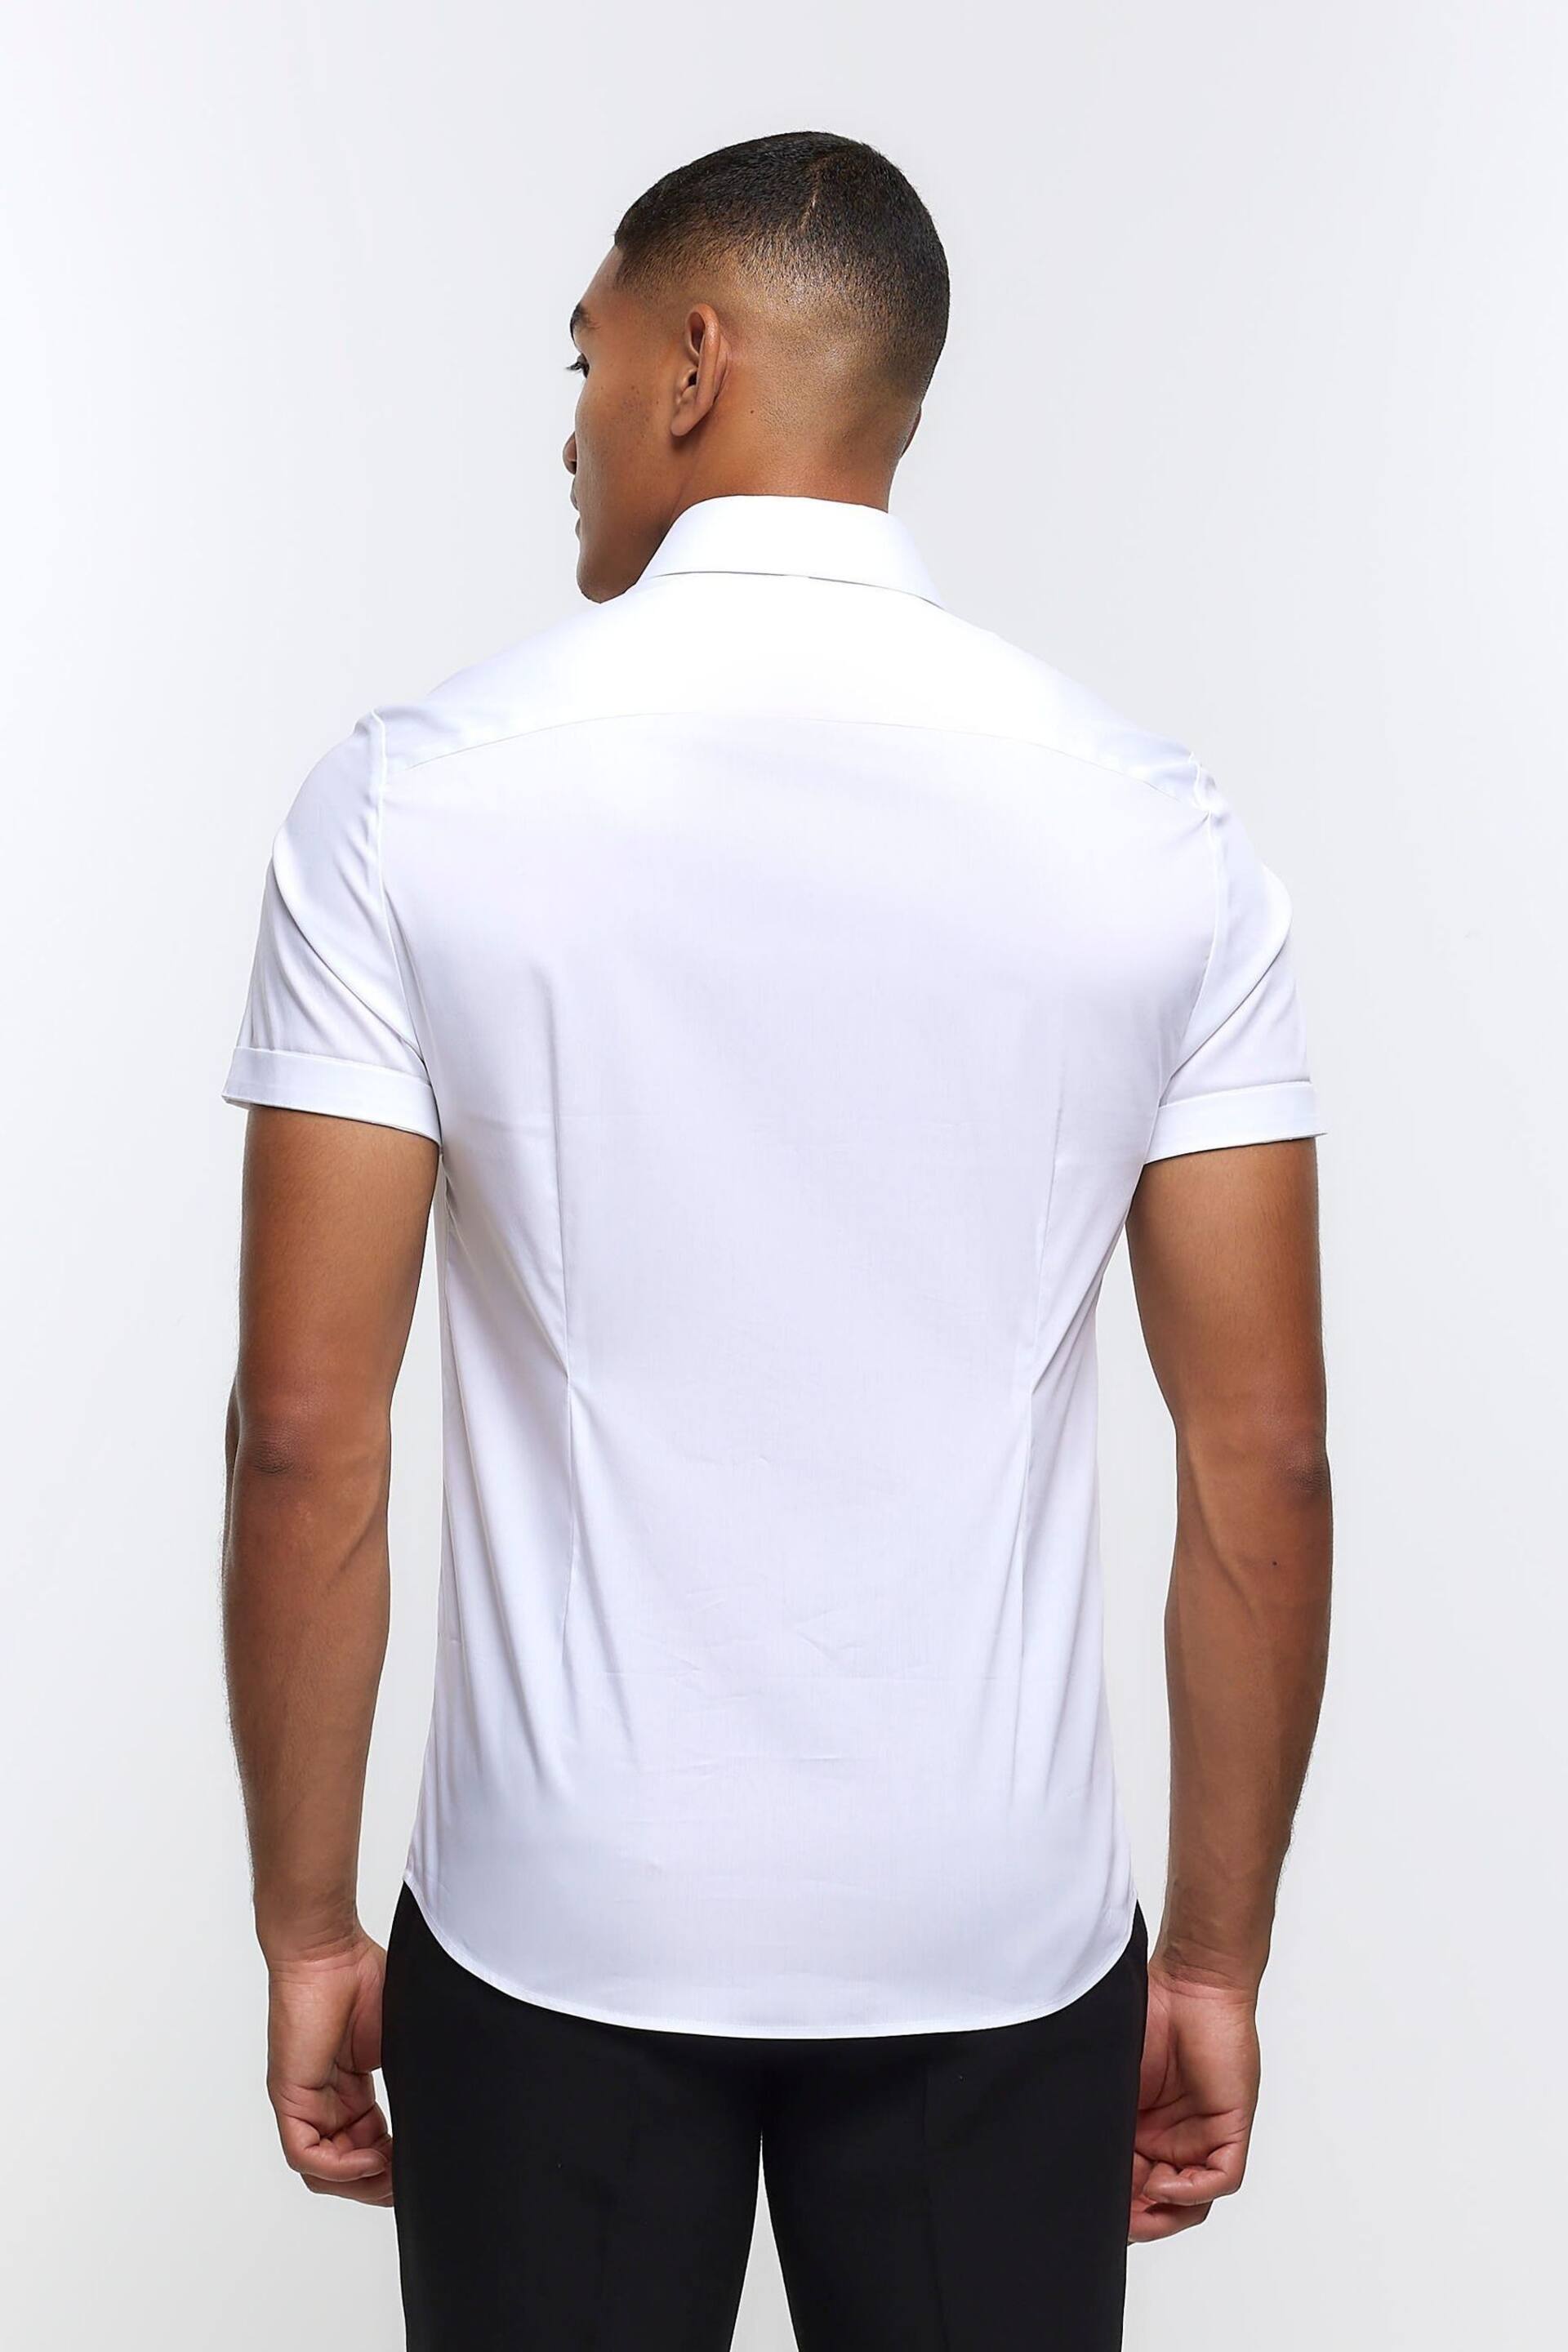 River Island Off white Muscle Fit Shirt - Image 2 of 6